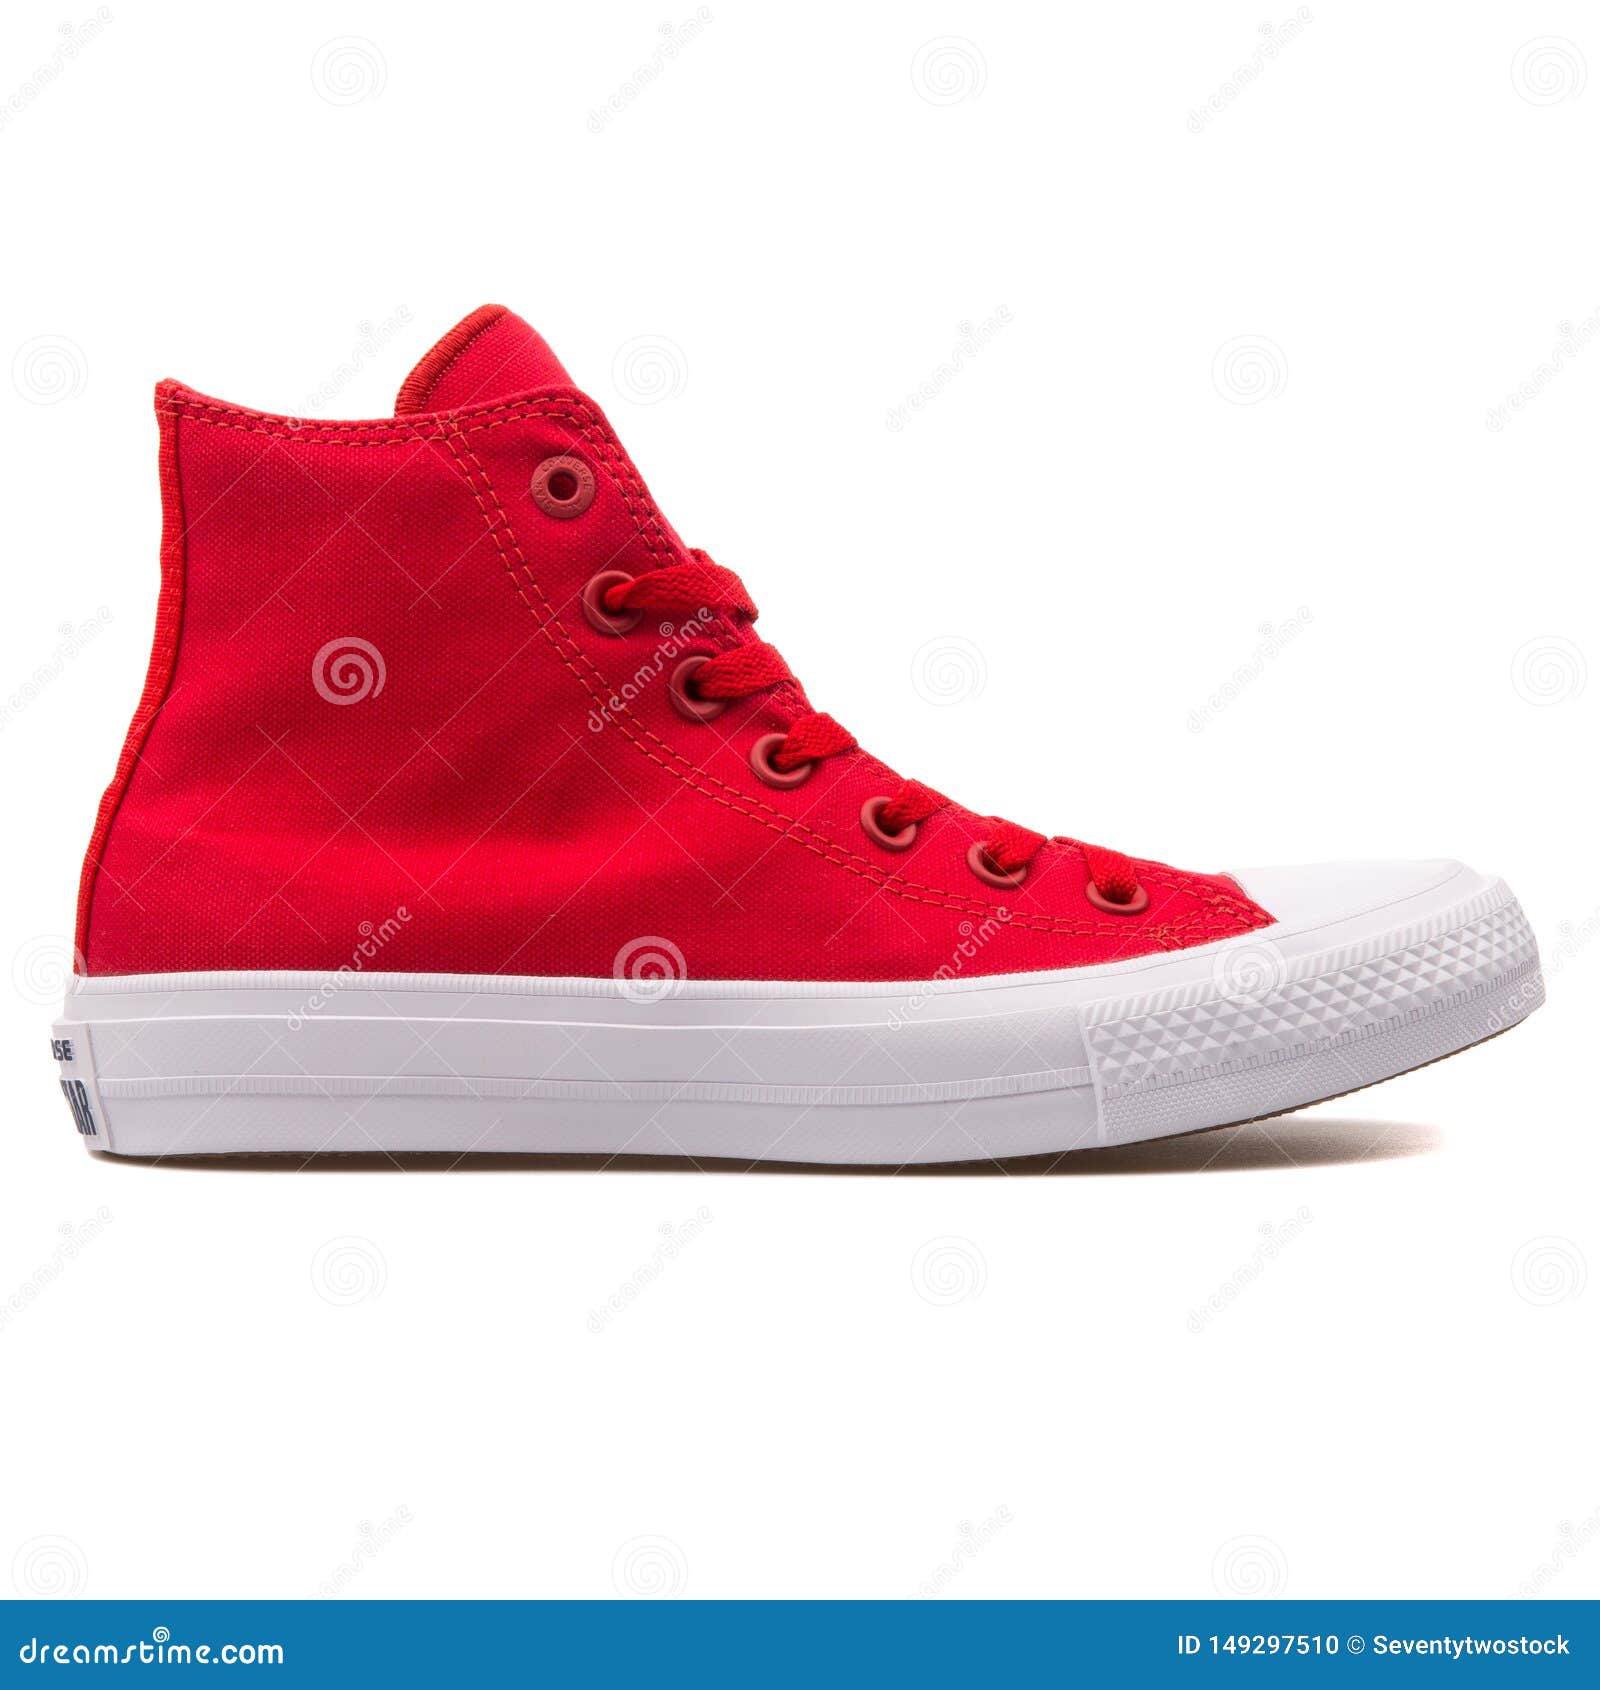 Converse Chuck Taylor 2 High Red and White Sneaker Editorial Image ...